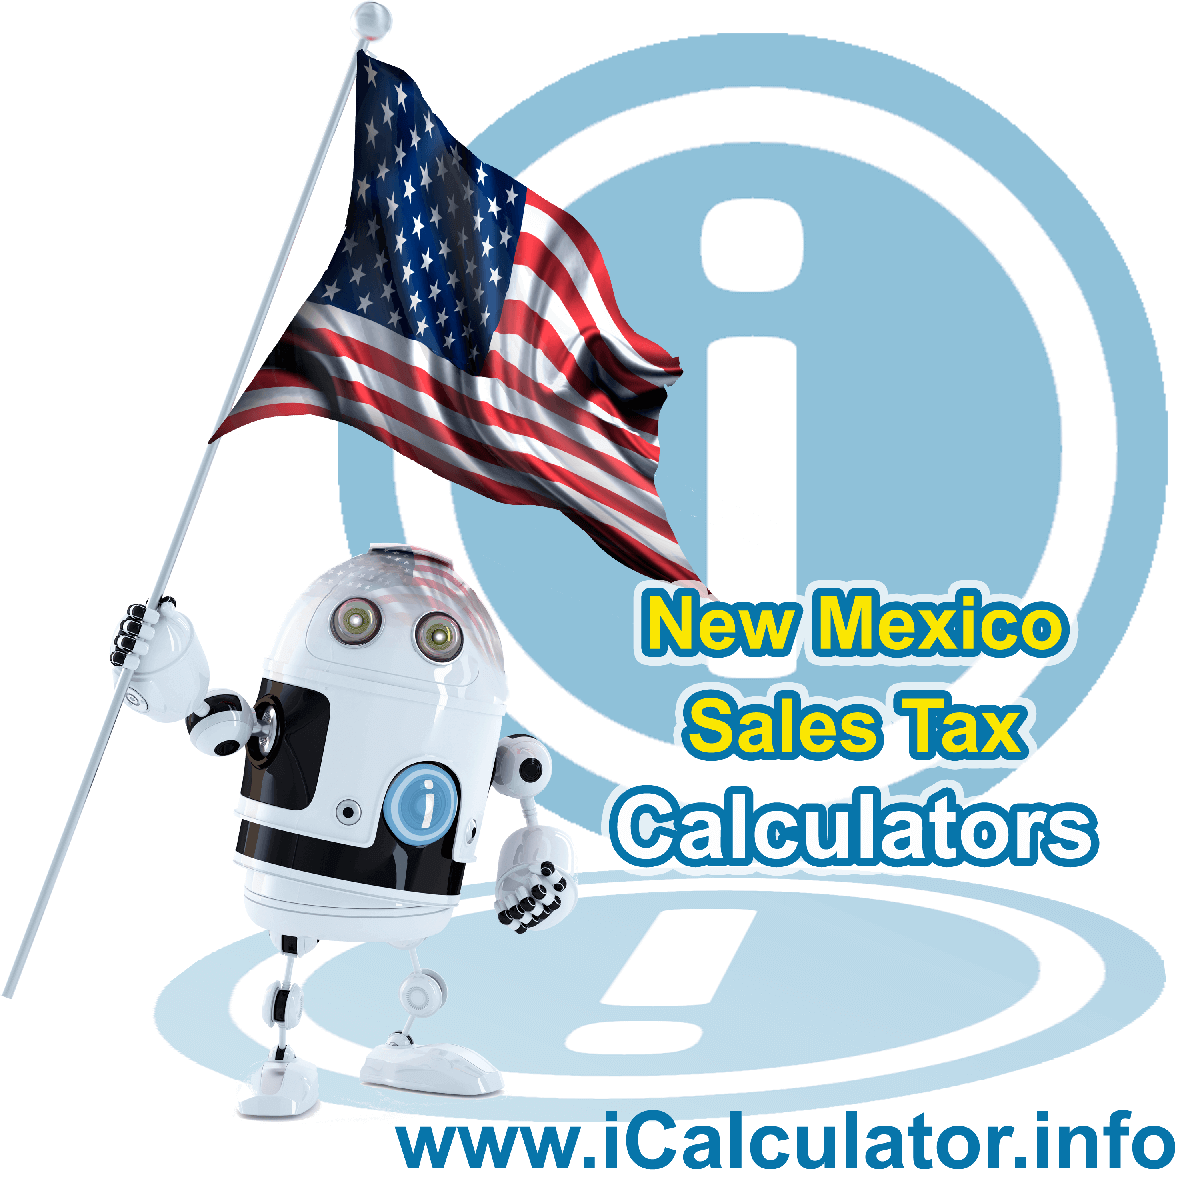 New Mexico Sales Tax Calculator US iCalculator™